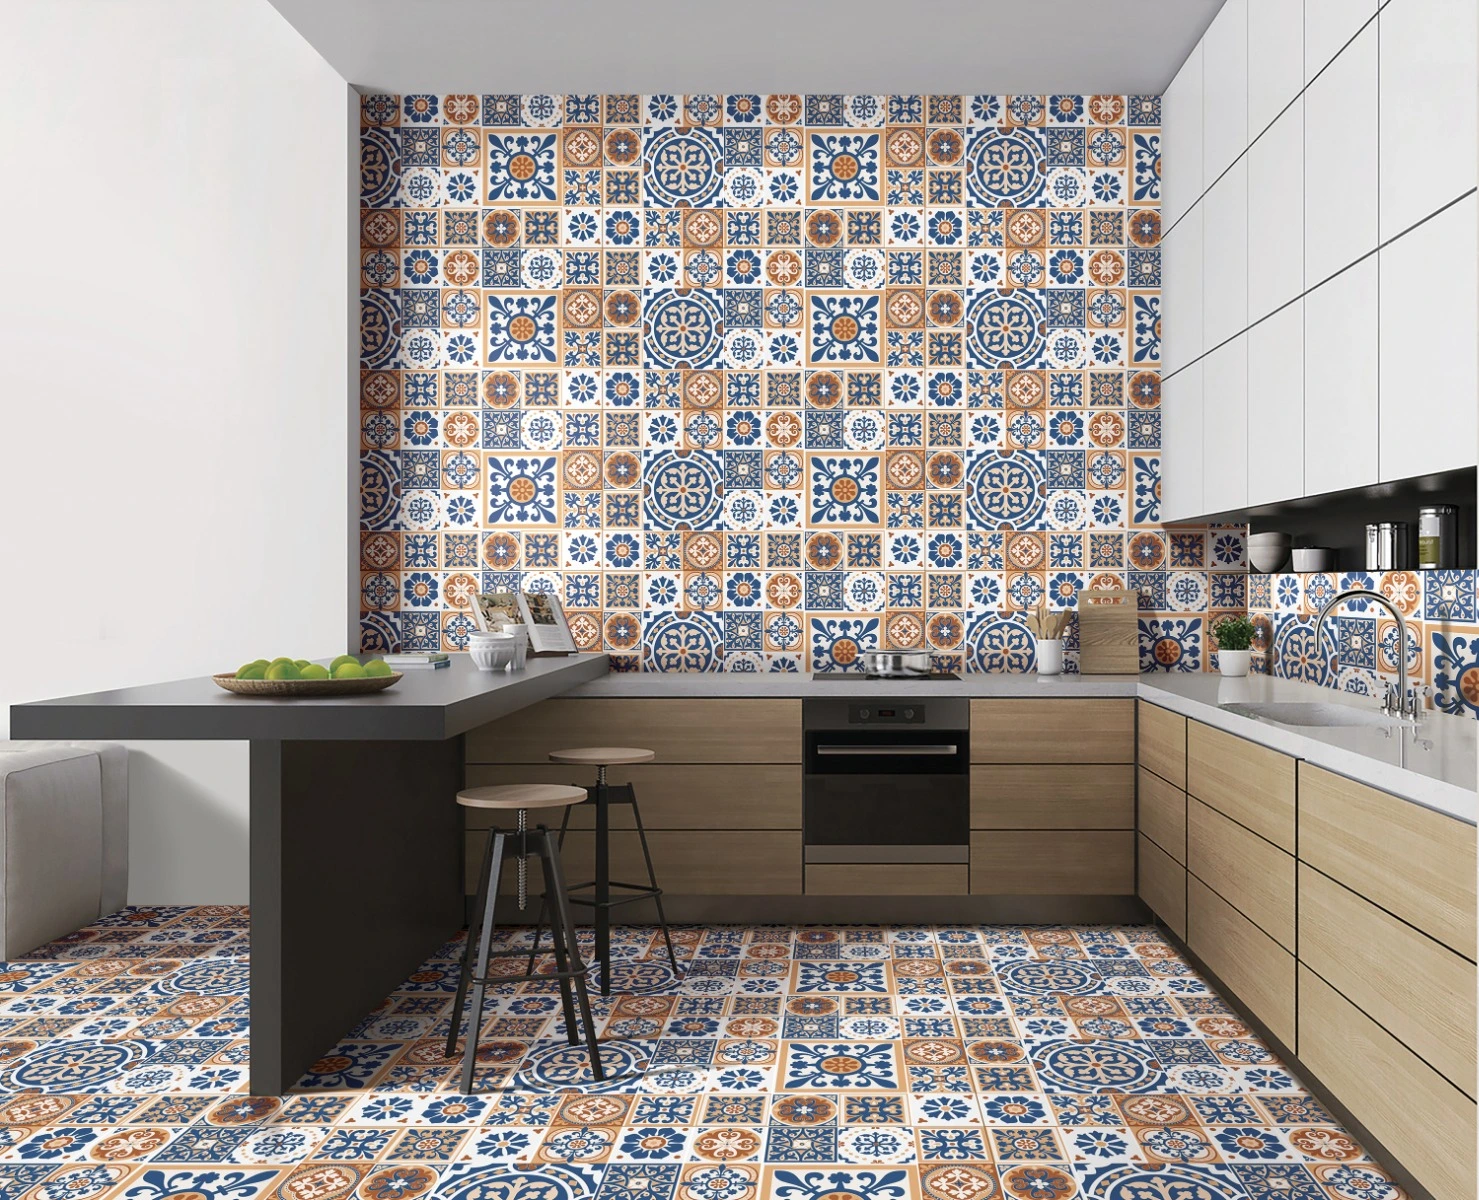 Where Can We Use Morocco Tiles Complete Guide